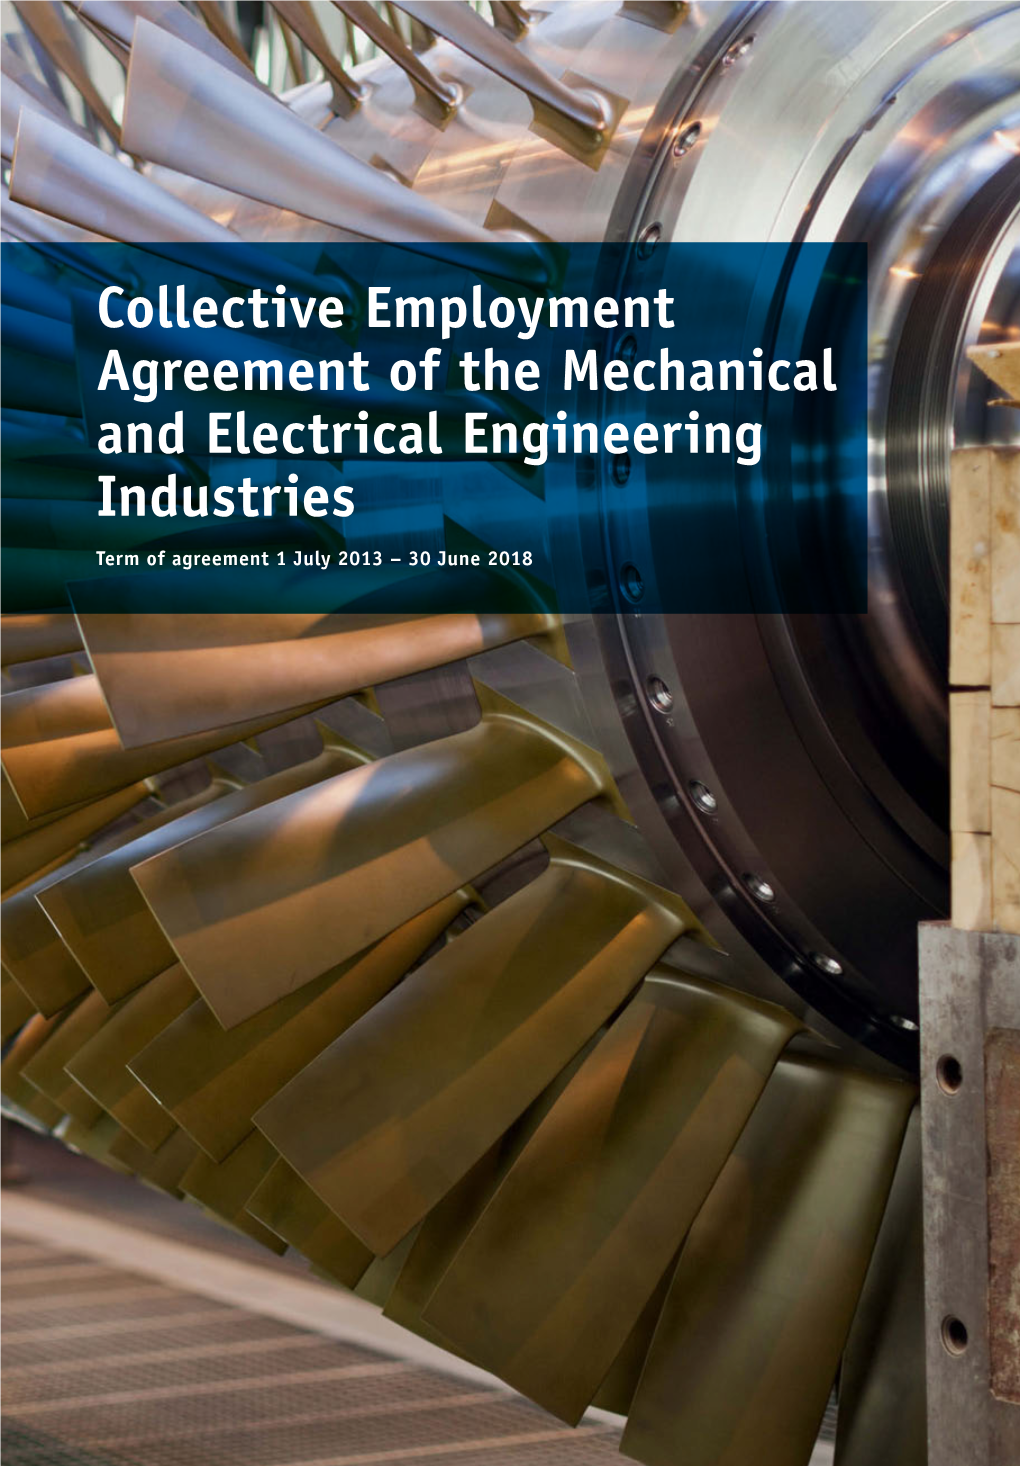 Collective Employment Agreement of the Mechanical and Electrical